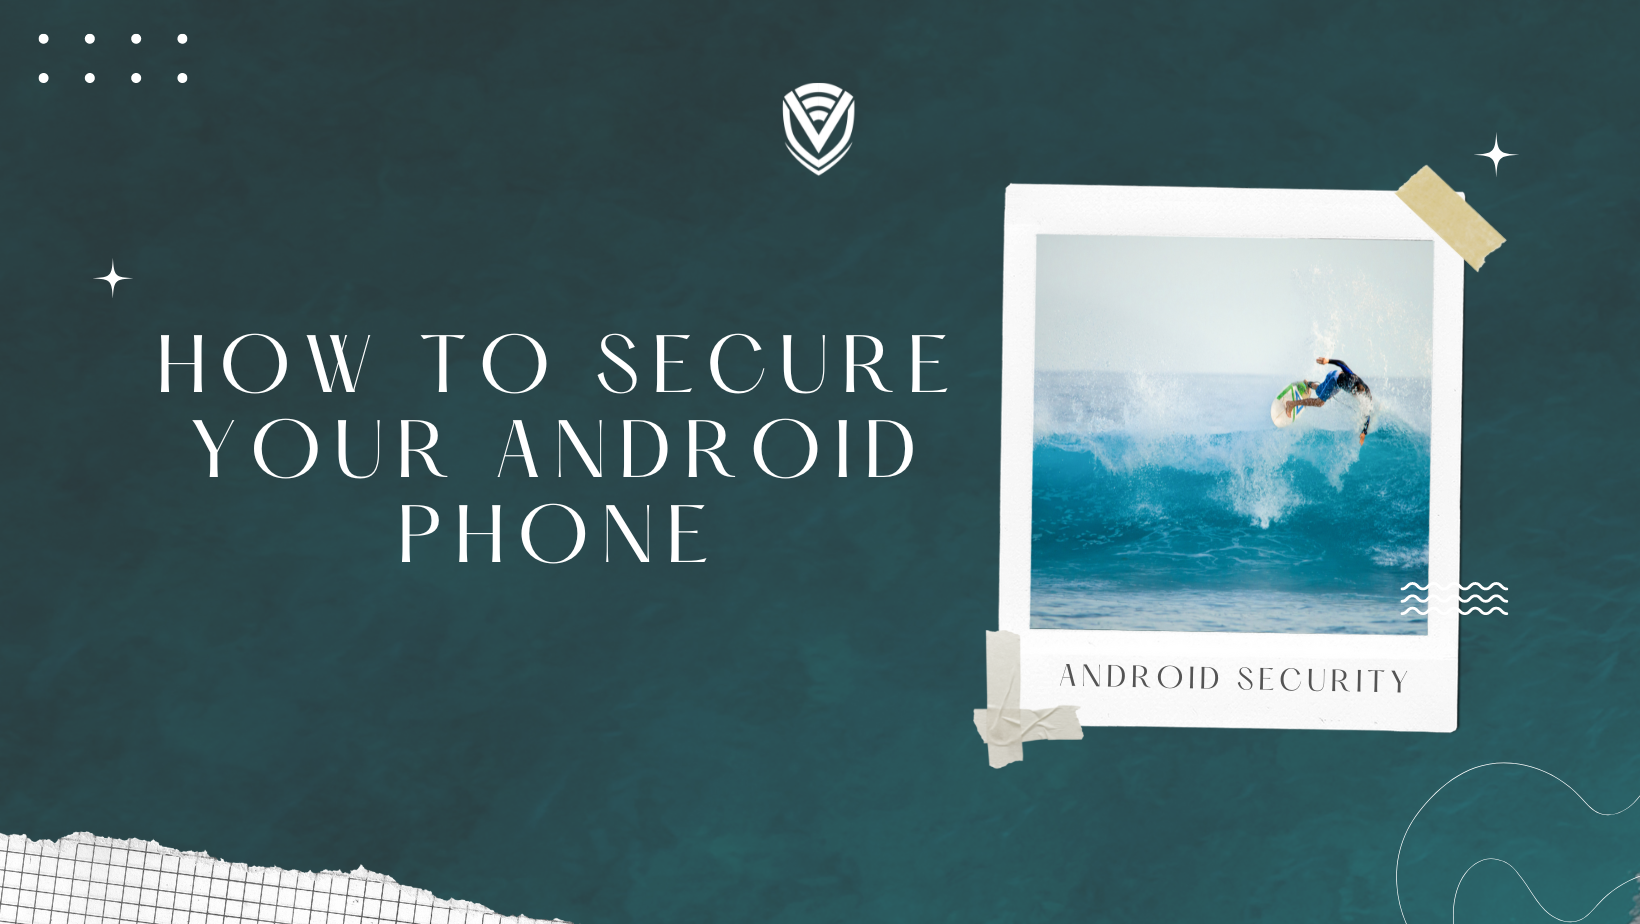 How to Secure your Android Phone